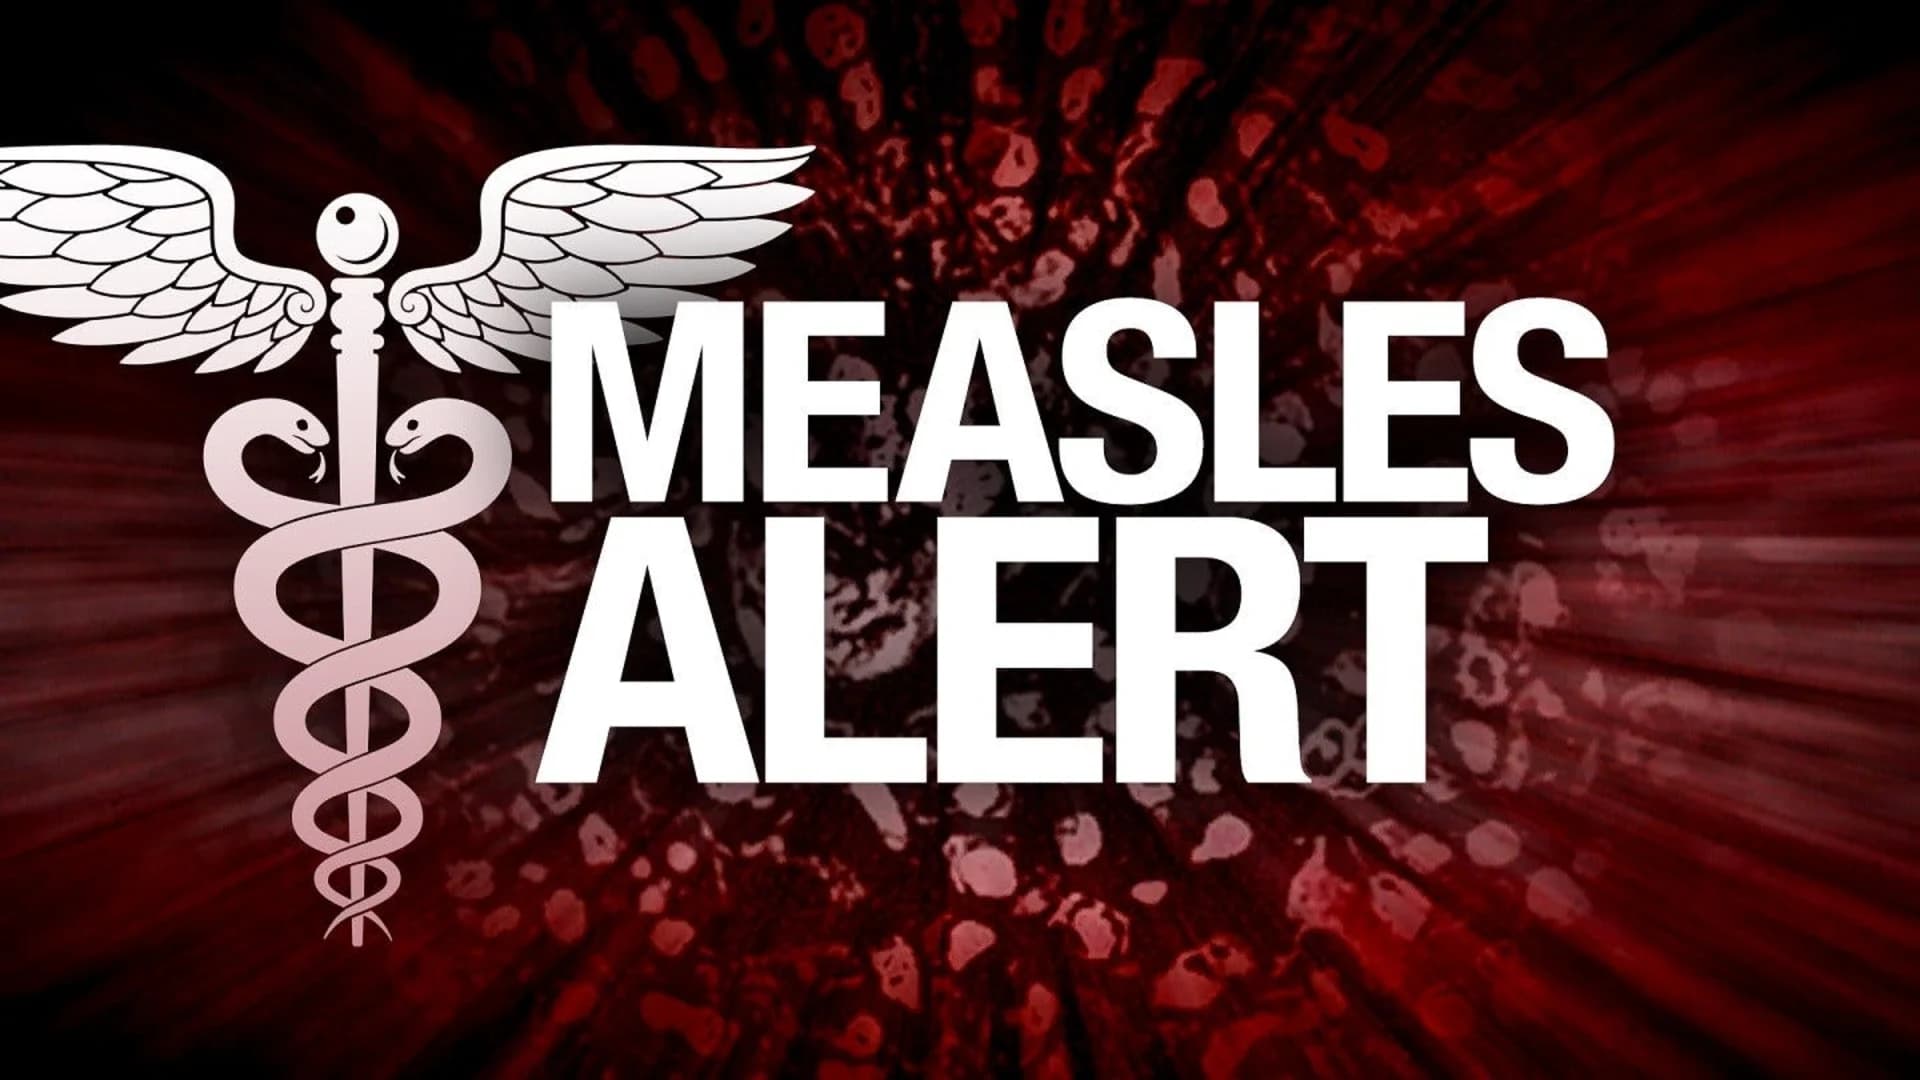 Officials confirm 3 more measles cases related Lakewood outbreak